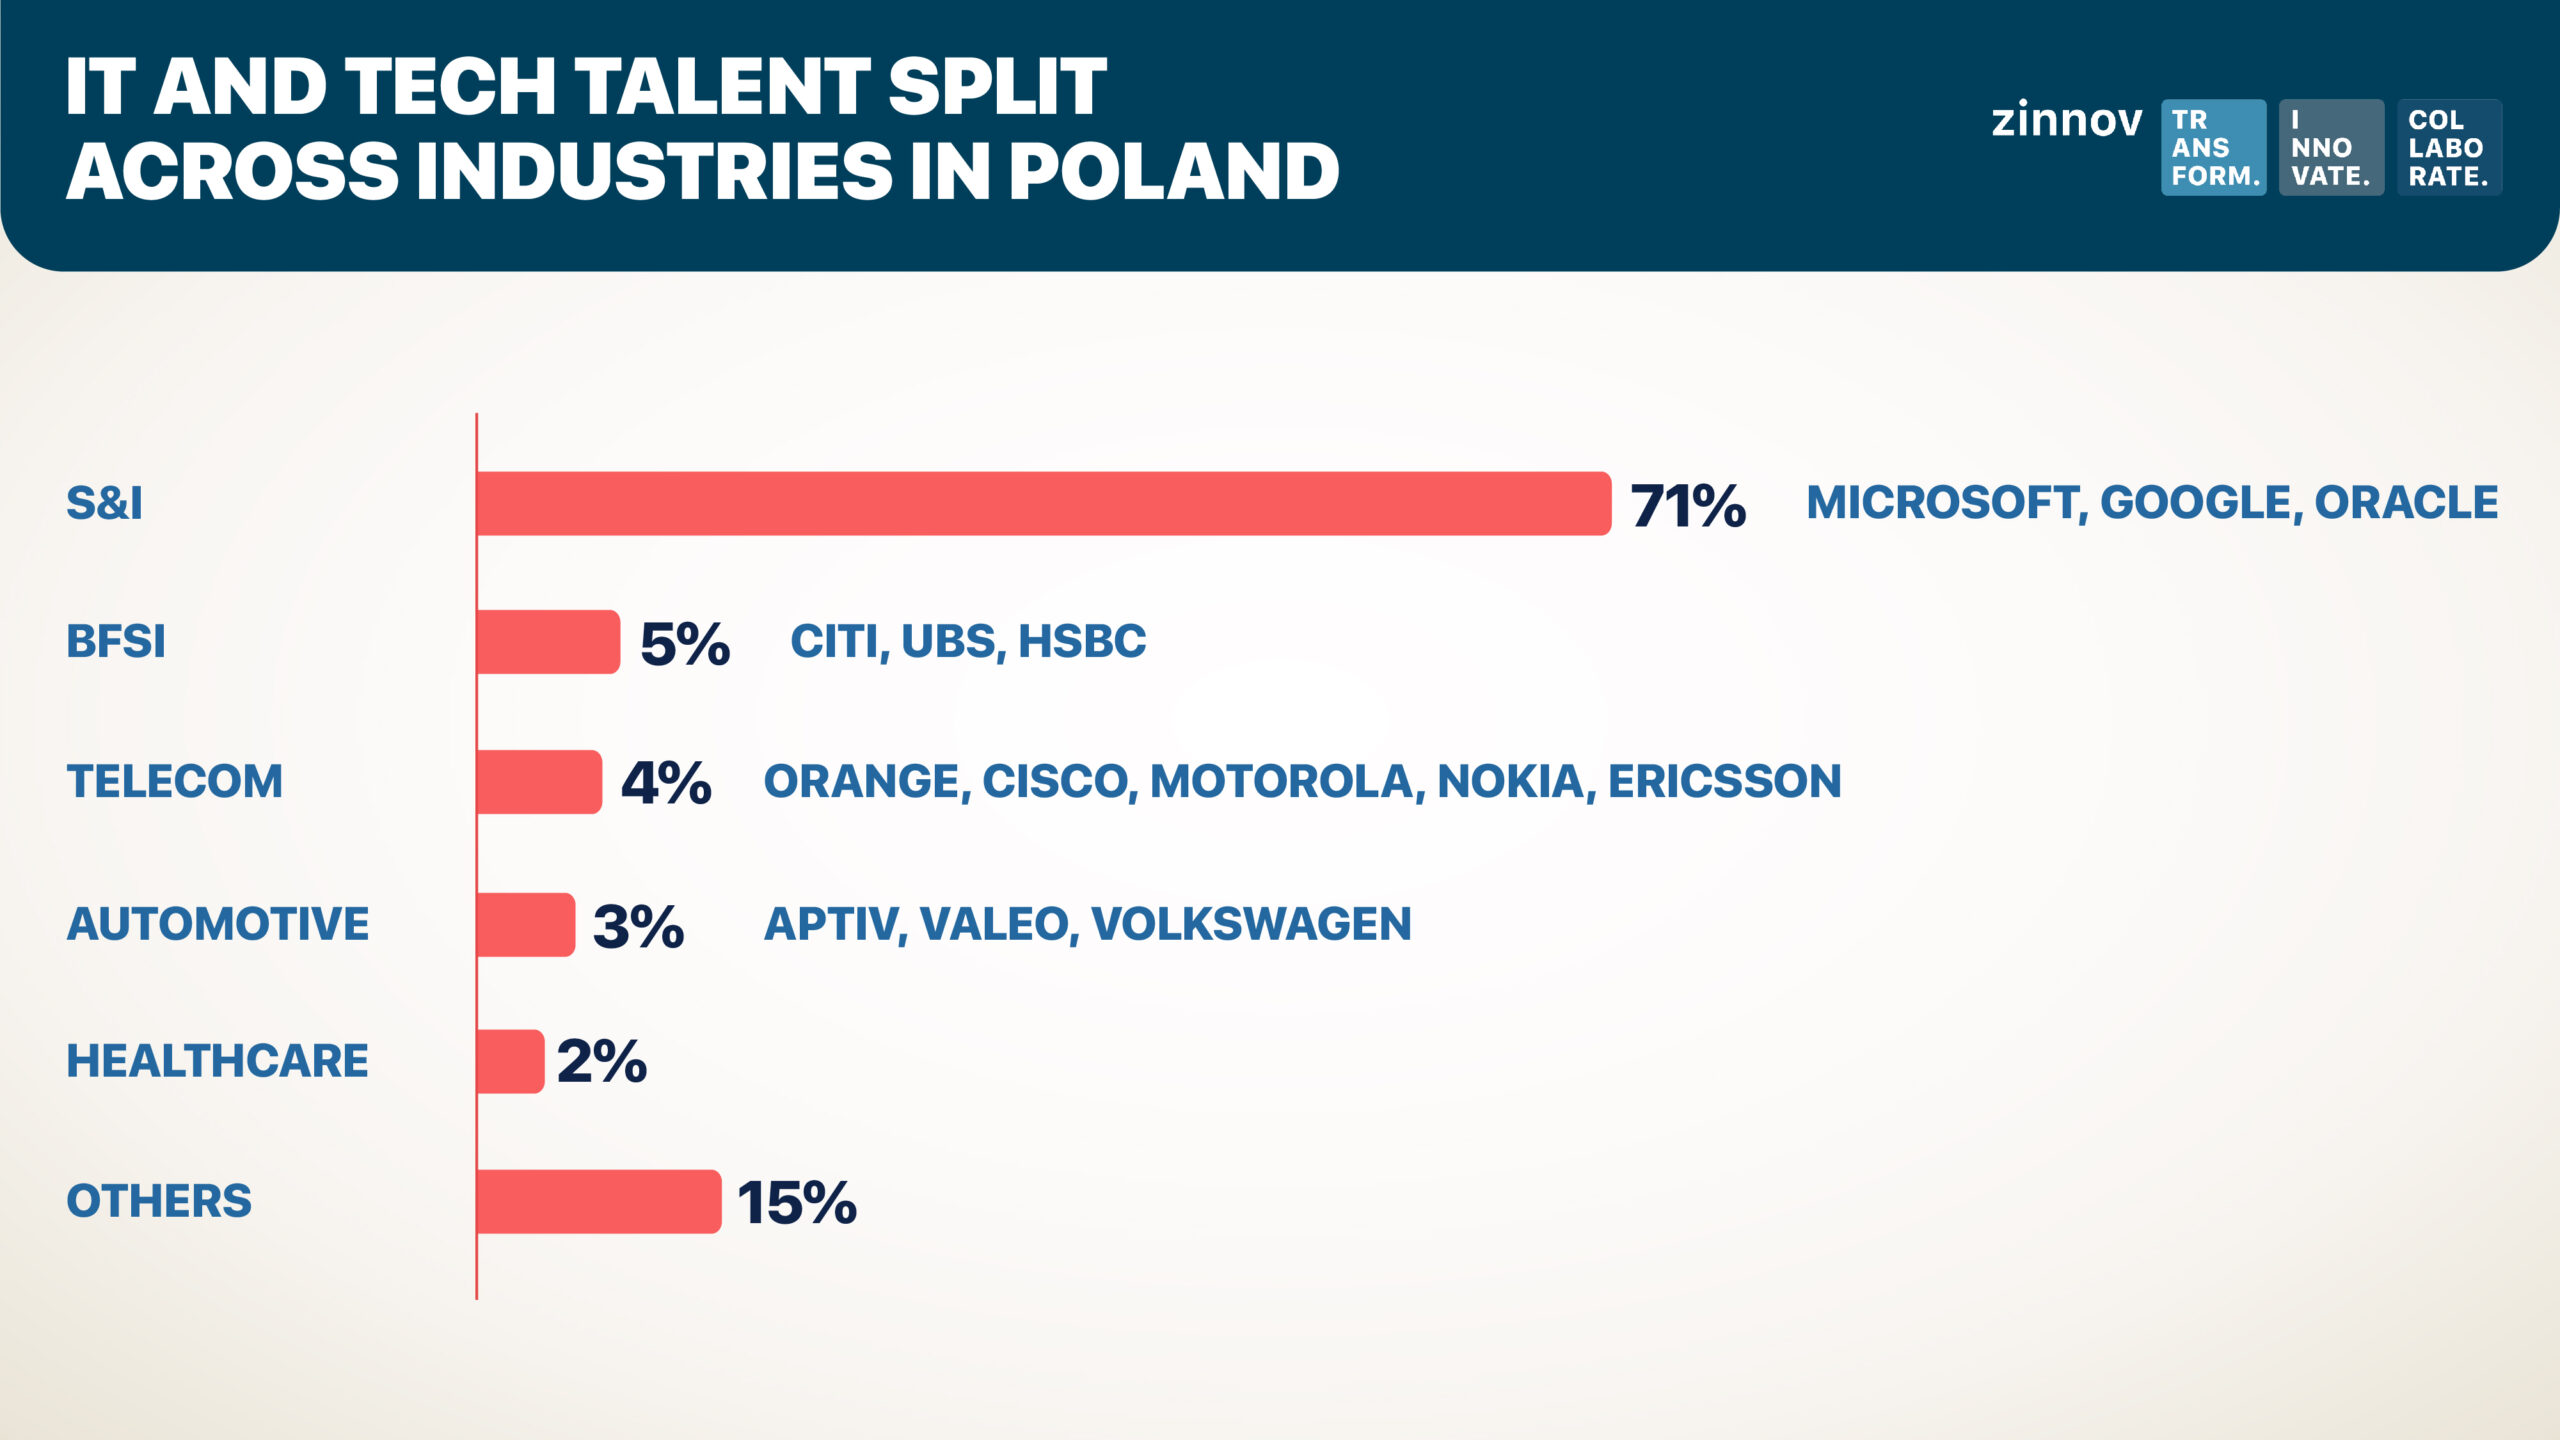 IT and tech talent in Poland